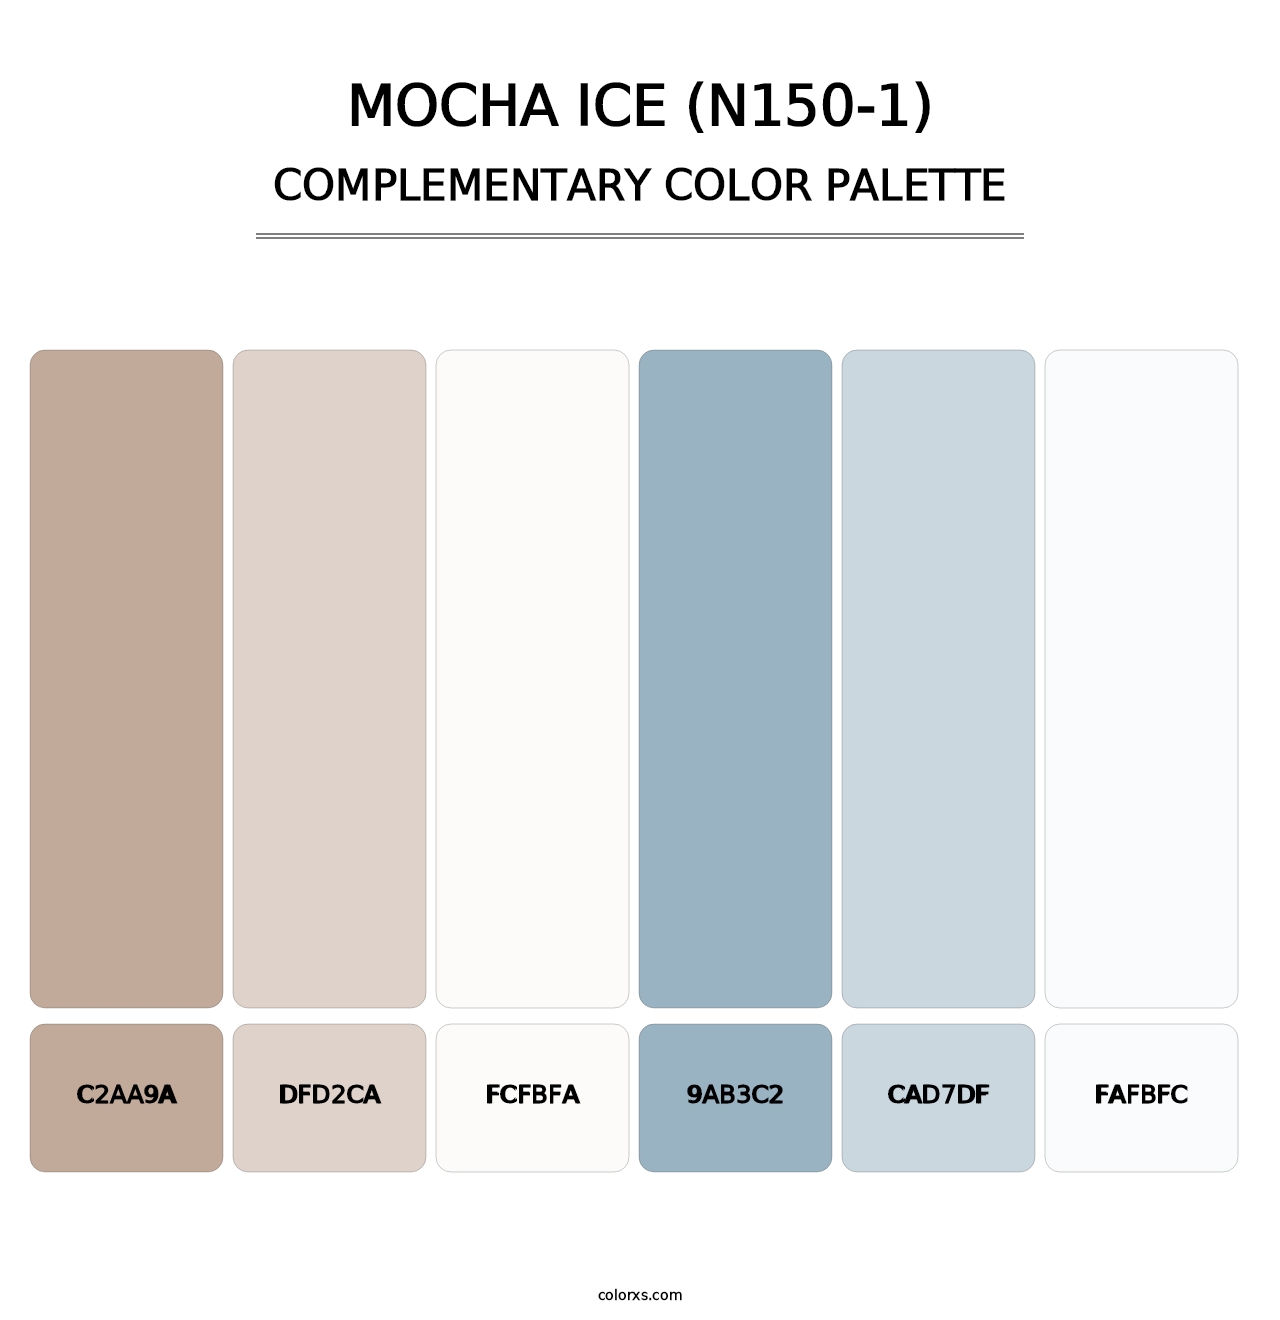 Mocha Ice (N150-1) - Complementary Color Palette